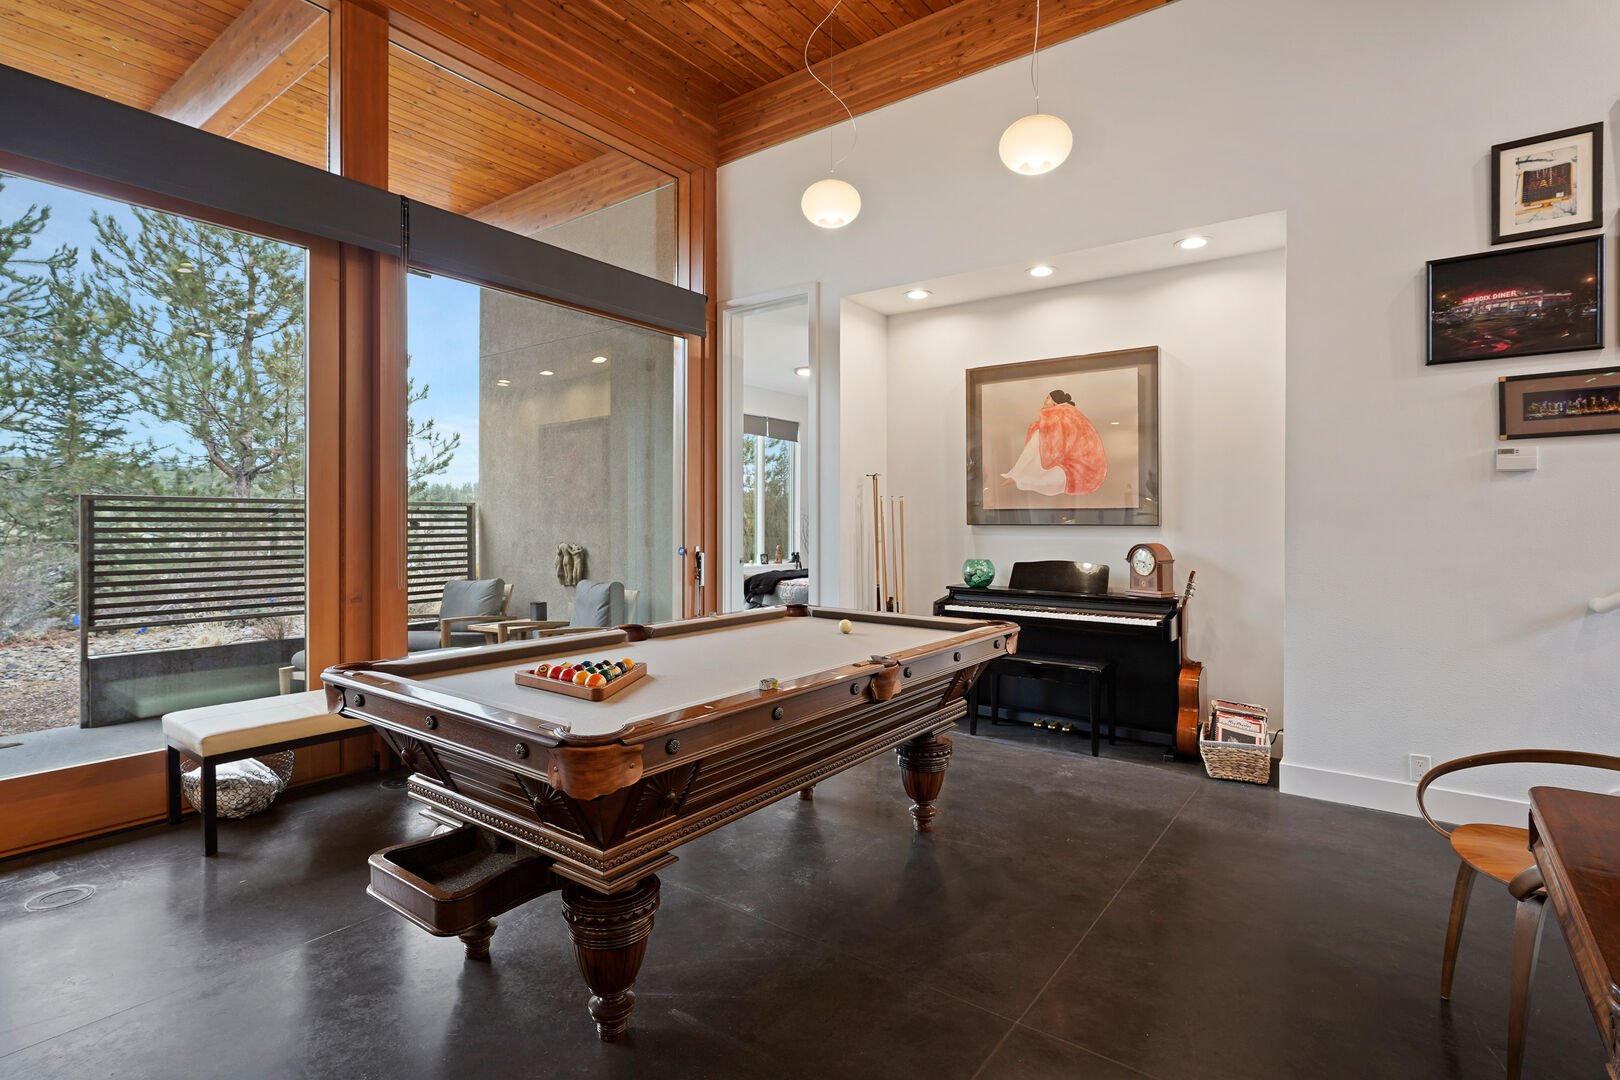 Vacation Rentals in Bend, OR with a Pool Table